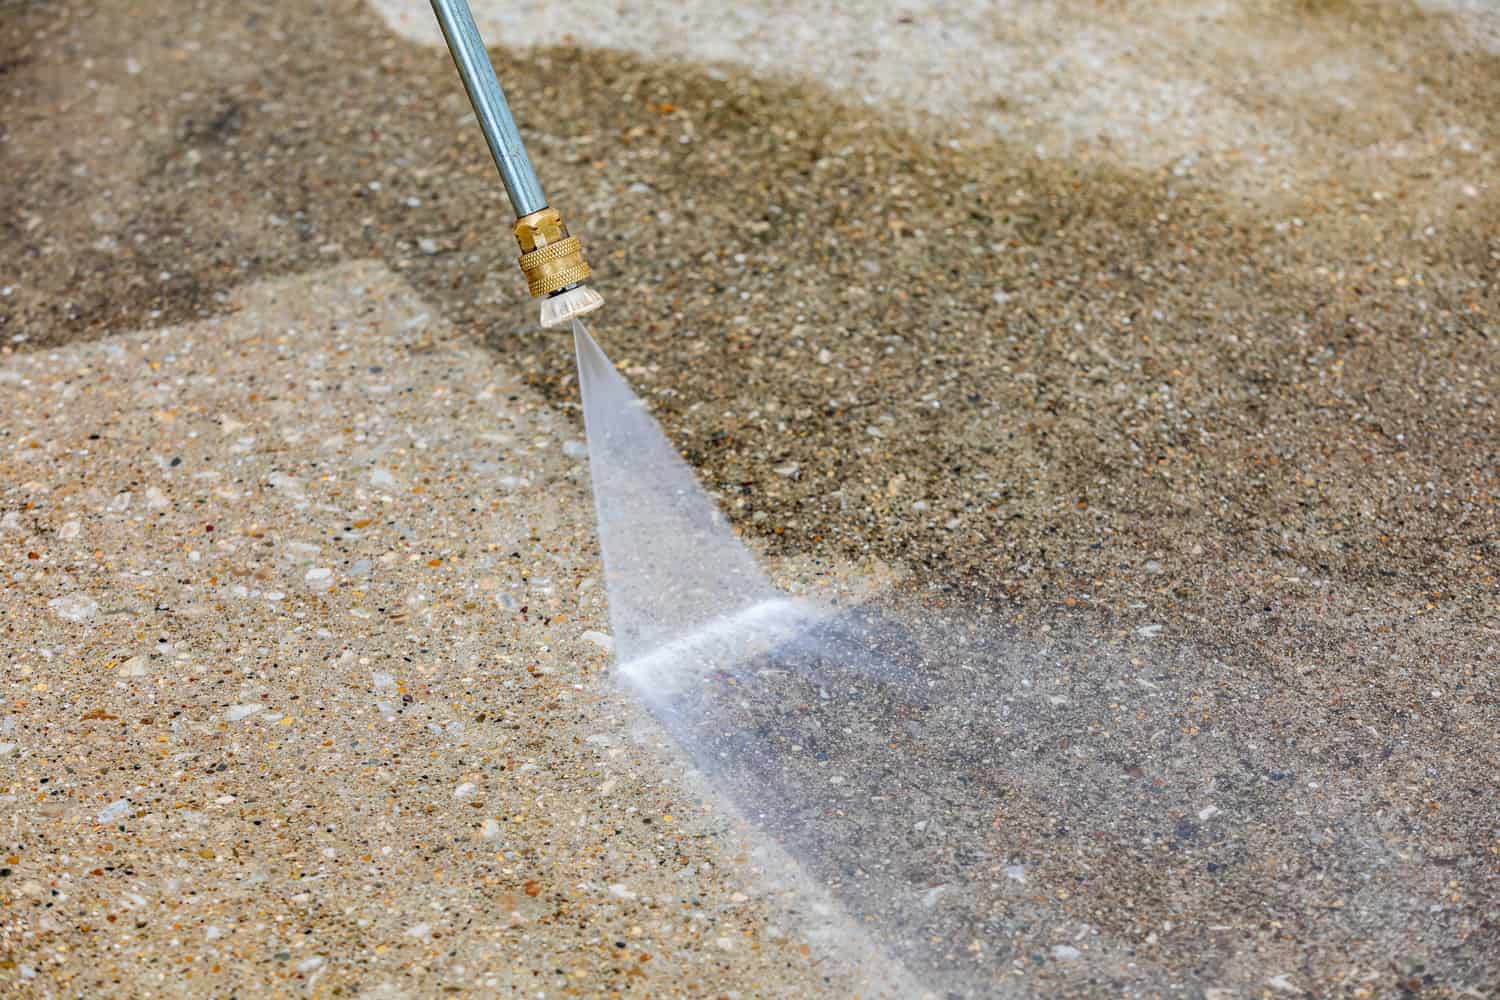 a close-up of a person pressure washing a surface